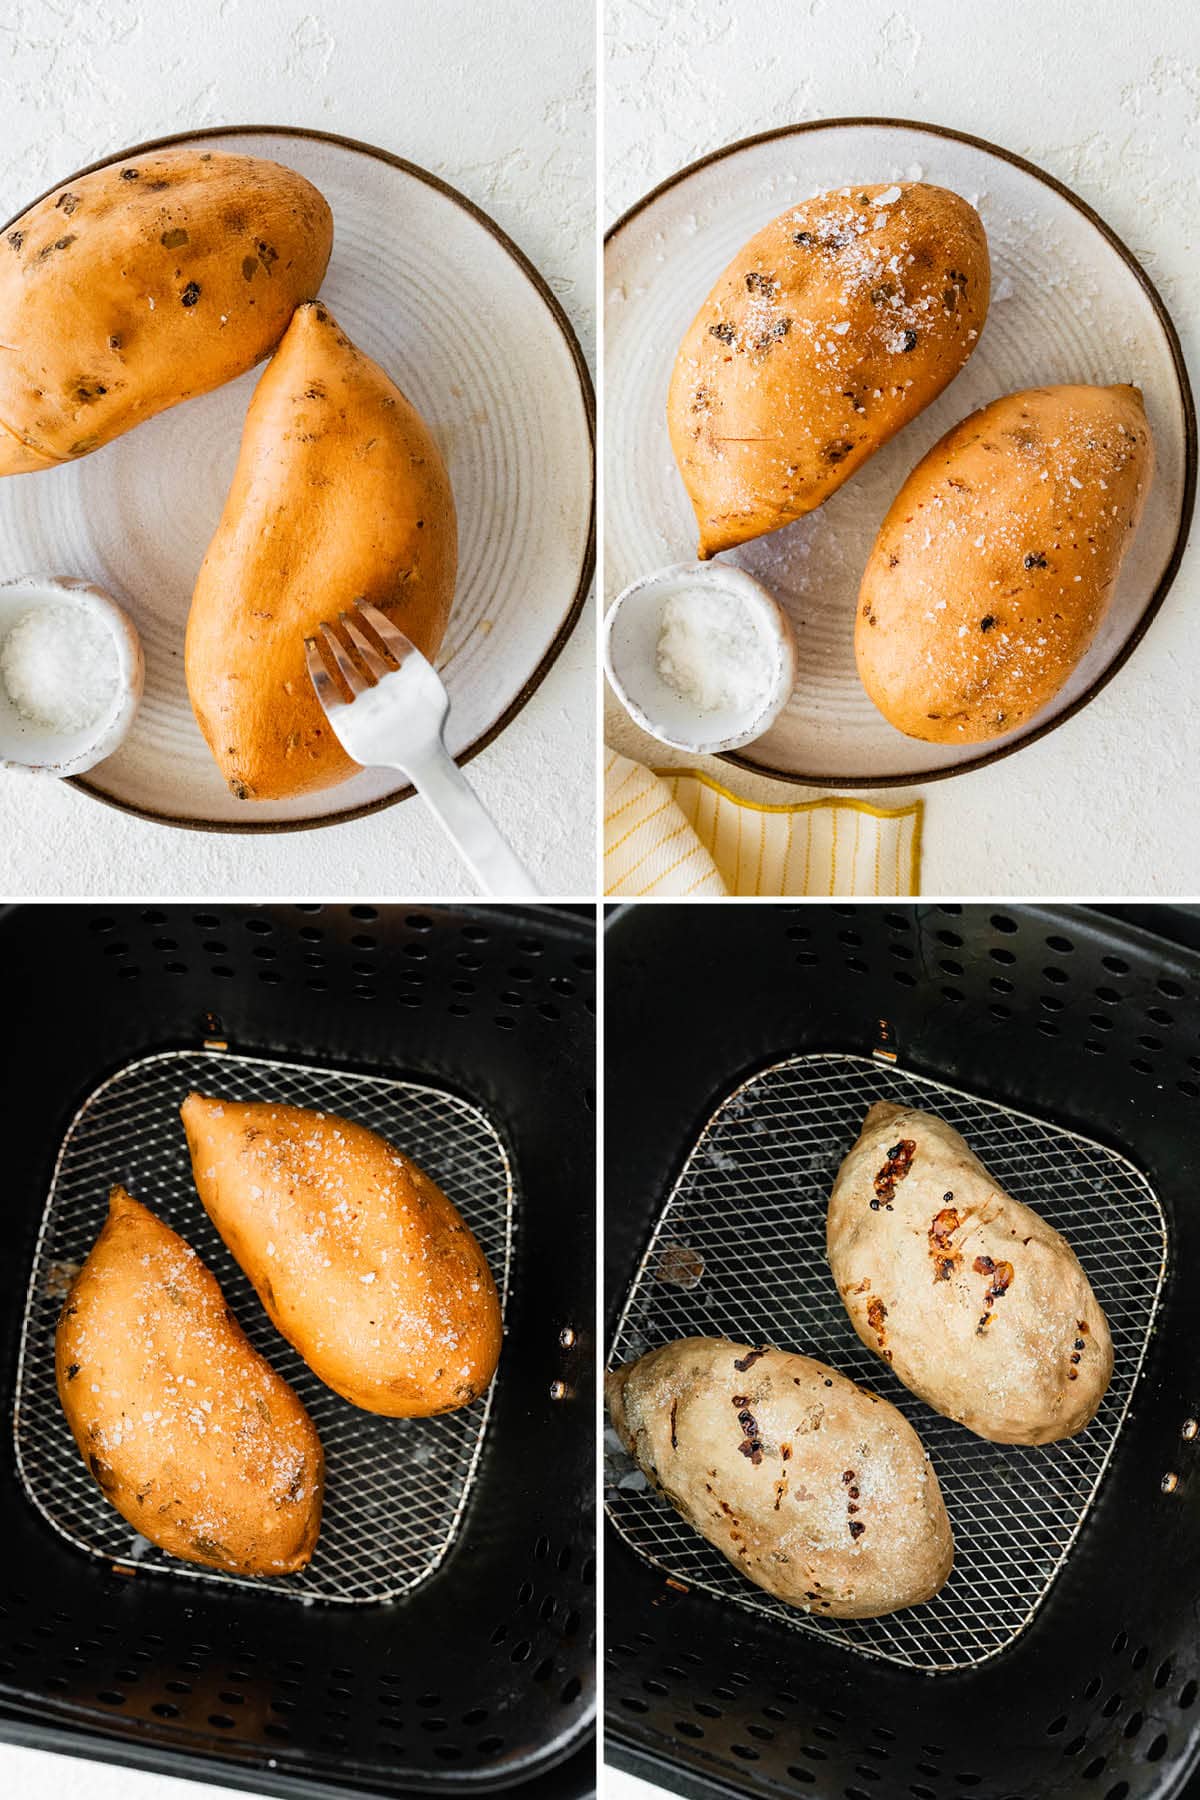 Four photos showing the steps to make Air Fryer Baked Sweet Potato: poking holes in sweet potatoes with a fork, sprinkling with coarse sea salt, and then air frying in an air fryer basket.